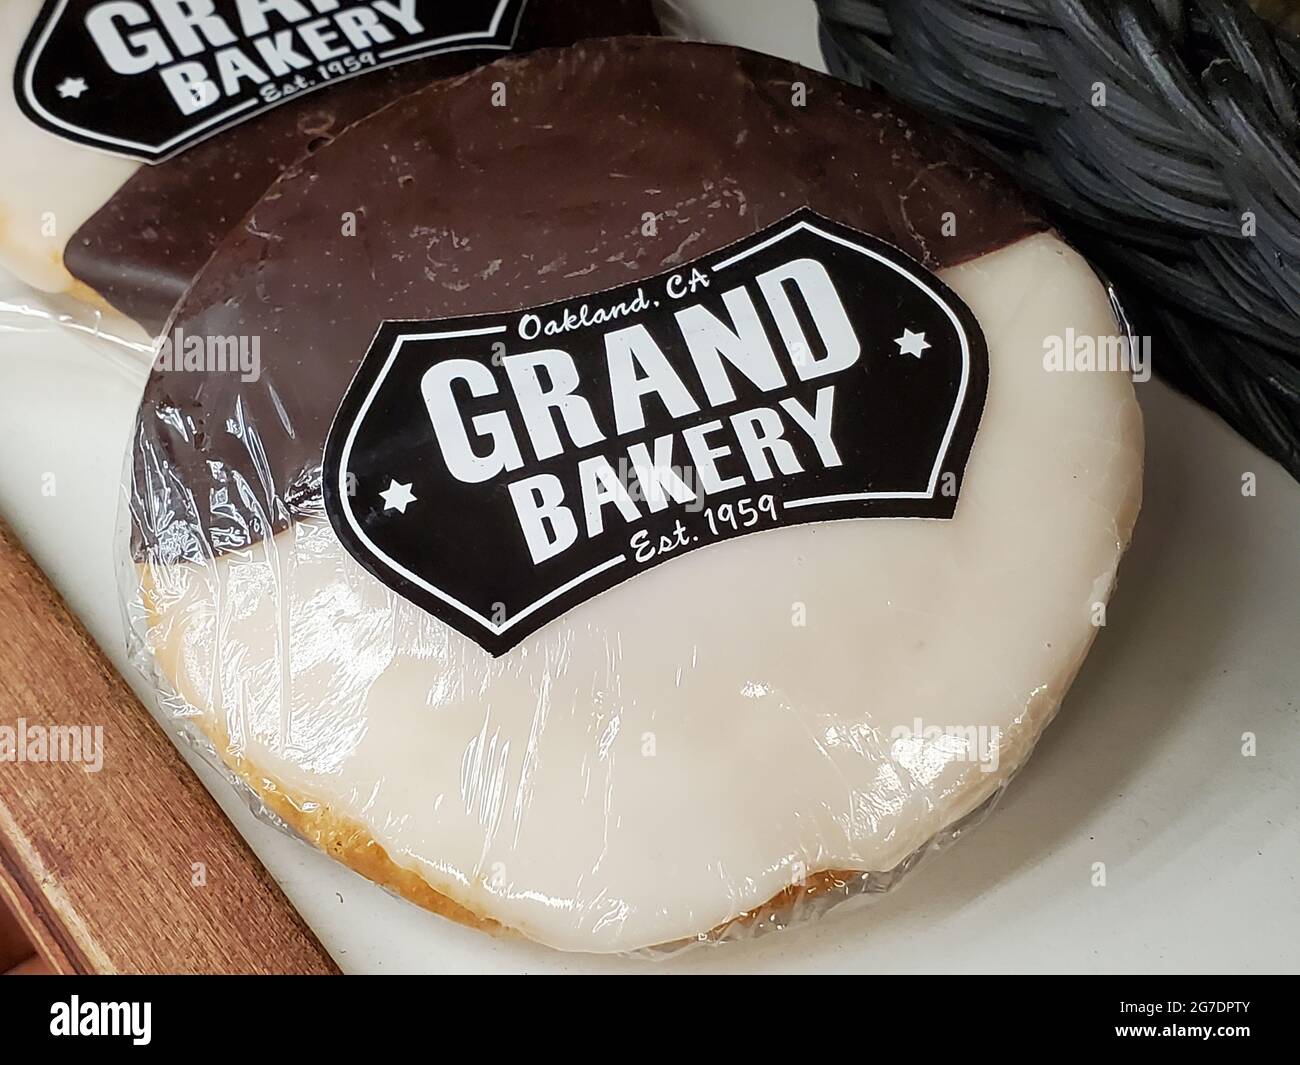 Close-up shot of a Grand Bakery black and white cake cookie coated with half chocolate, half icing, in Lafayette, California, April 26, 2021. () Stock Photo